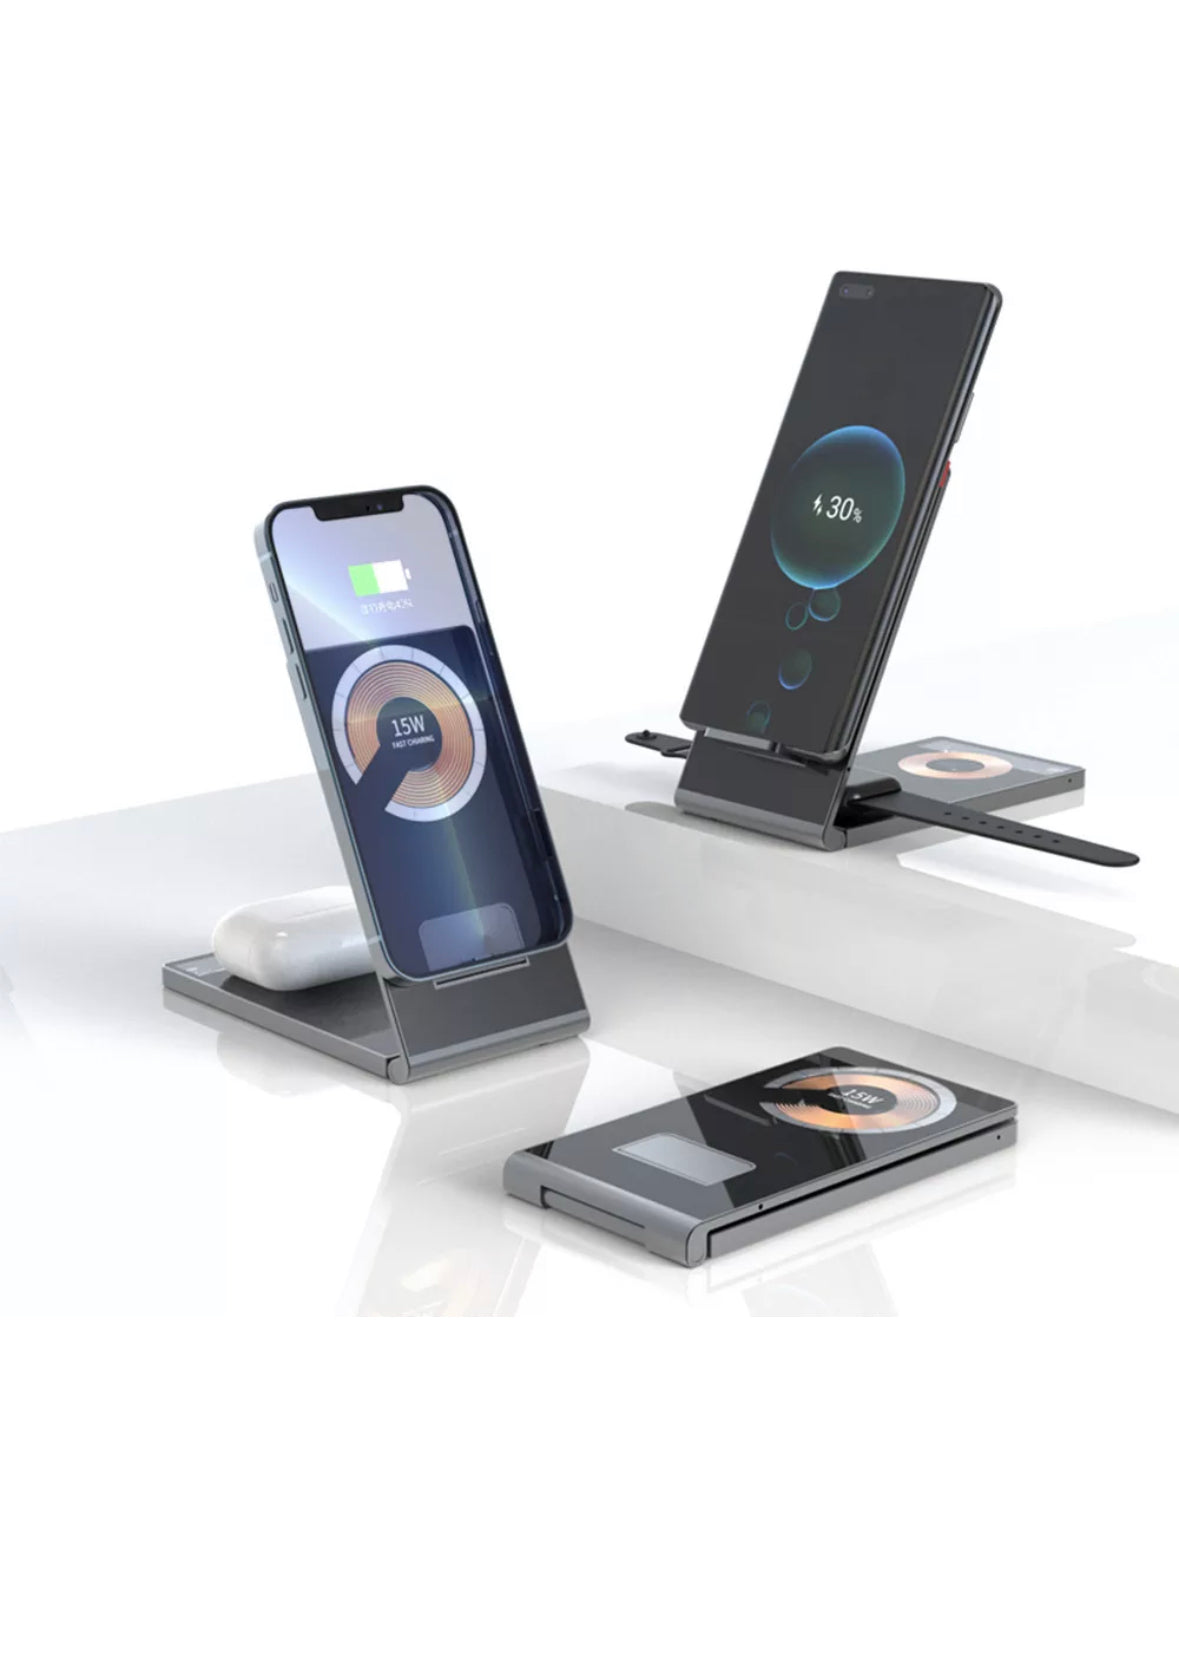 4-in-1 Magsafe Trans Wireless Charging Station | Compatible with Android and Apple